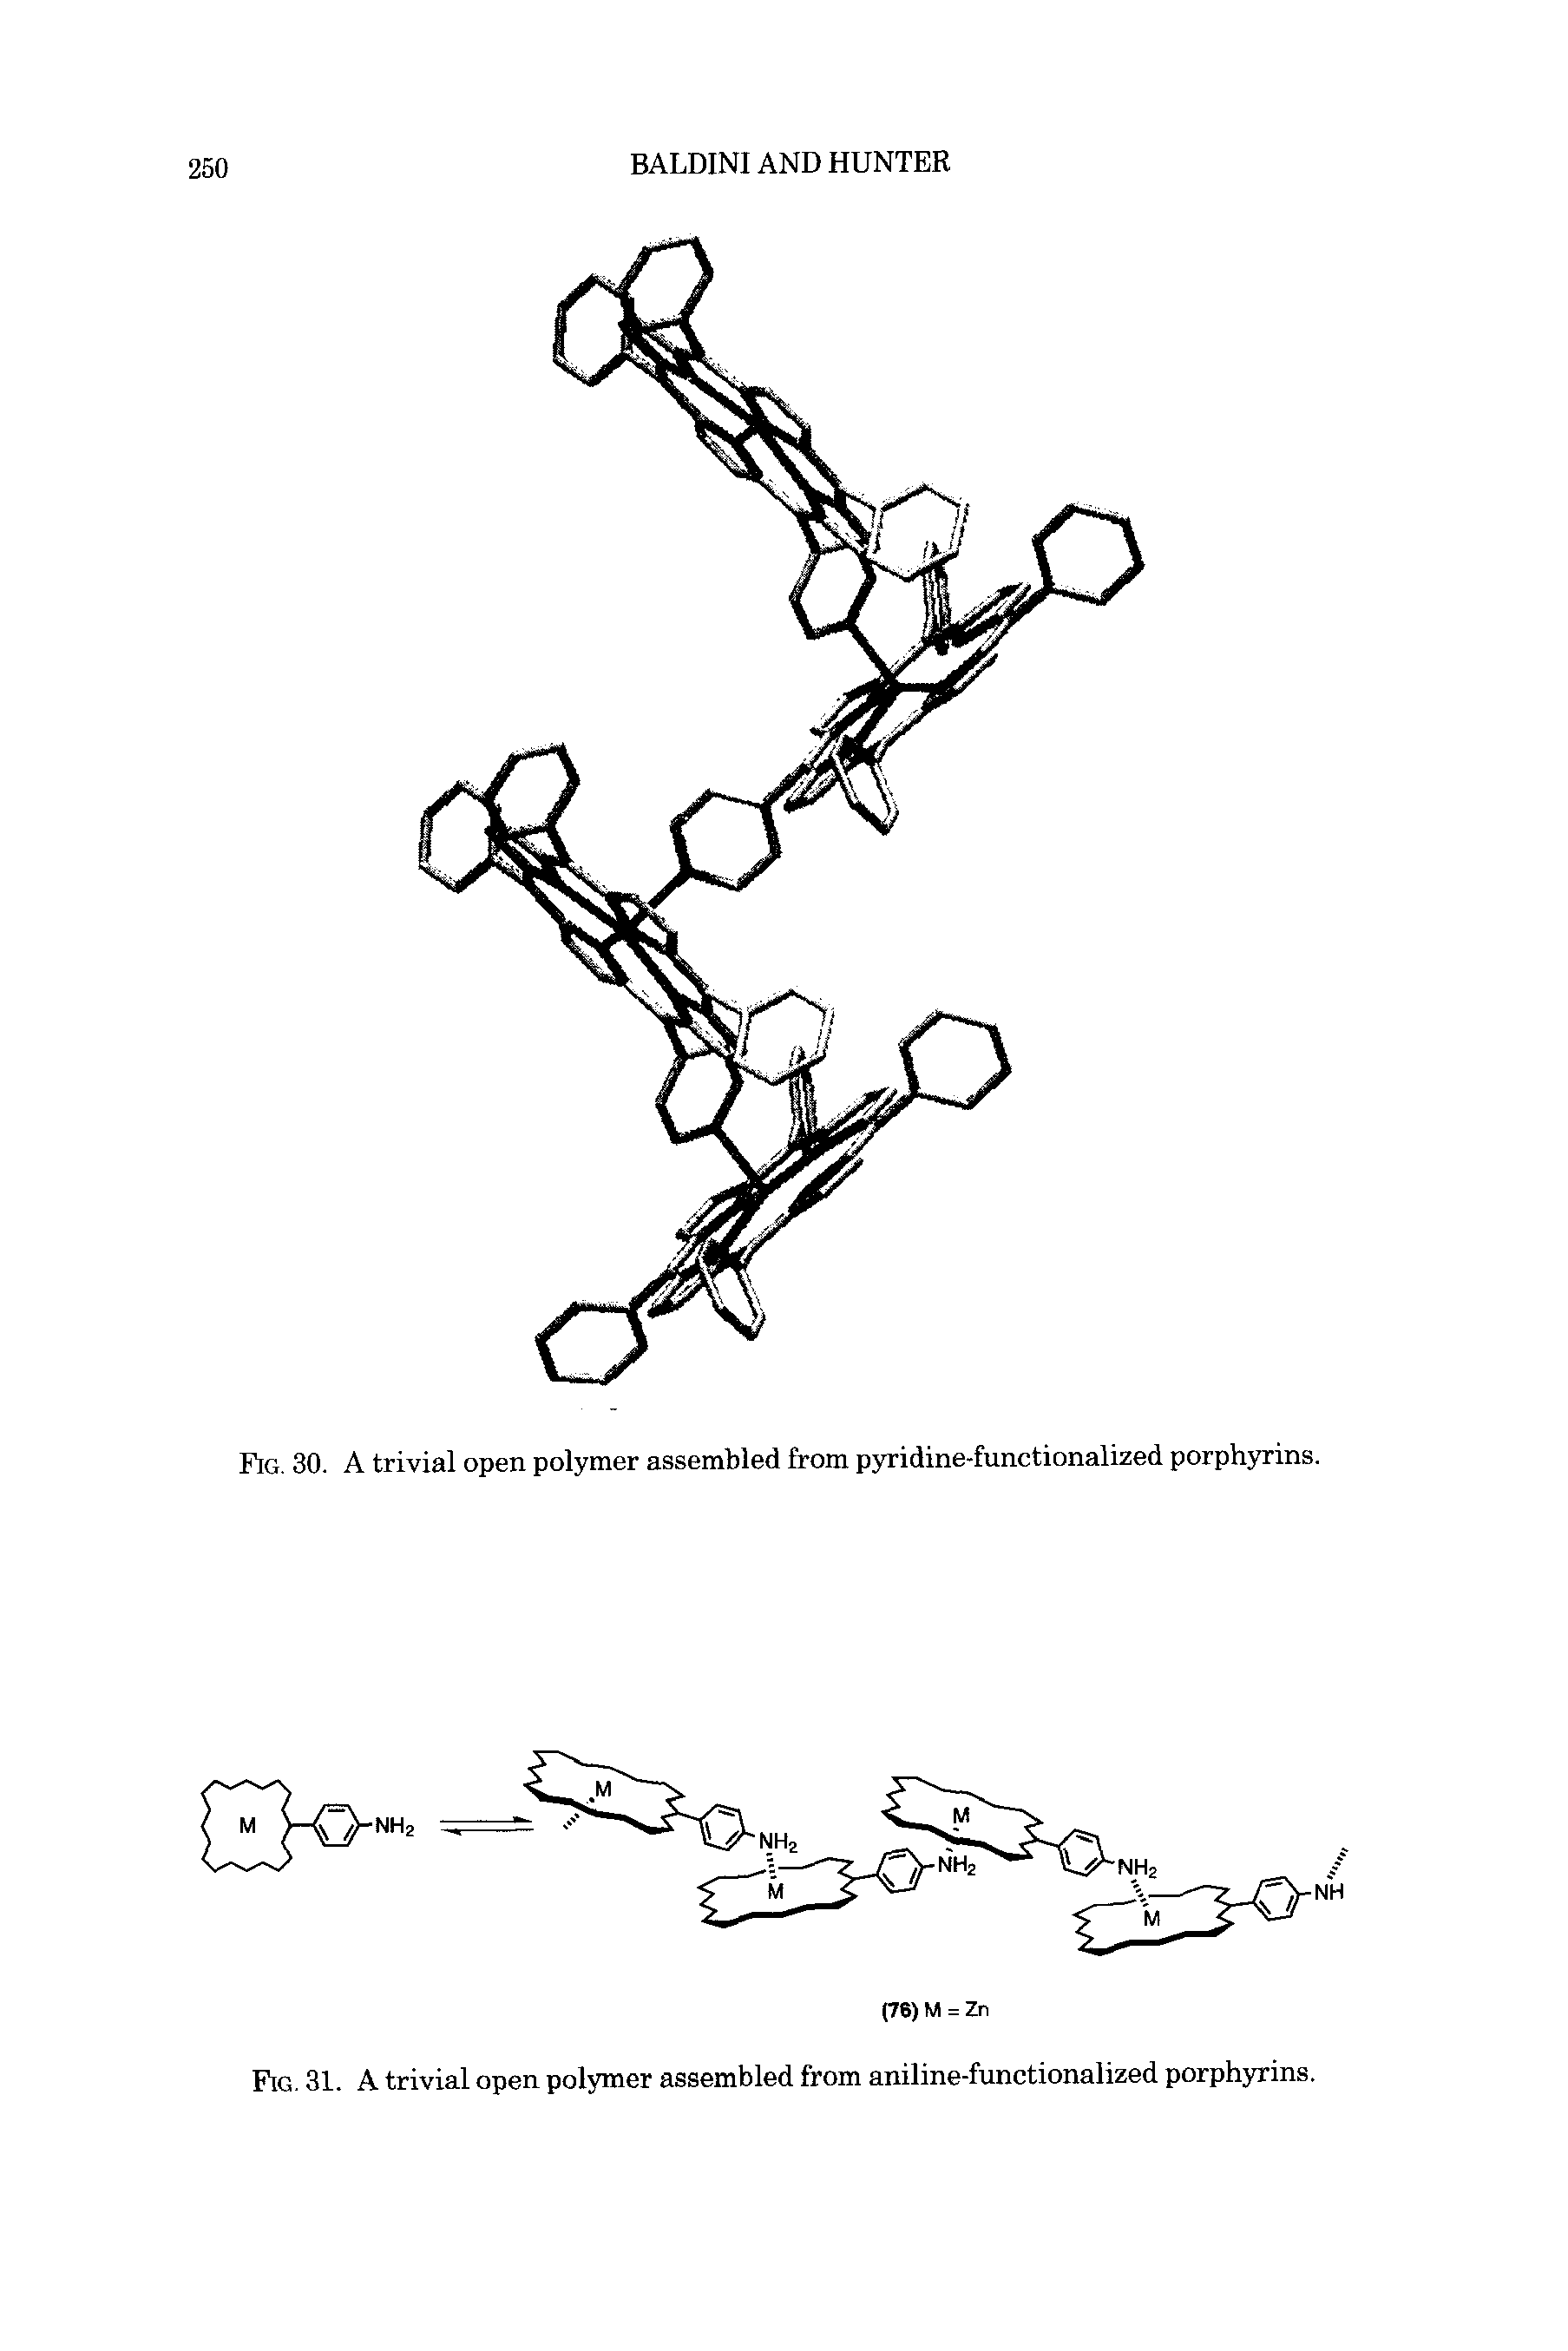 Fig. 30. A trivial open polymer assembled from pyridine-functionalized porphyrins.